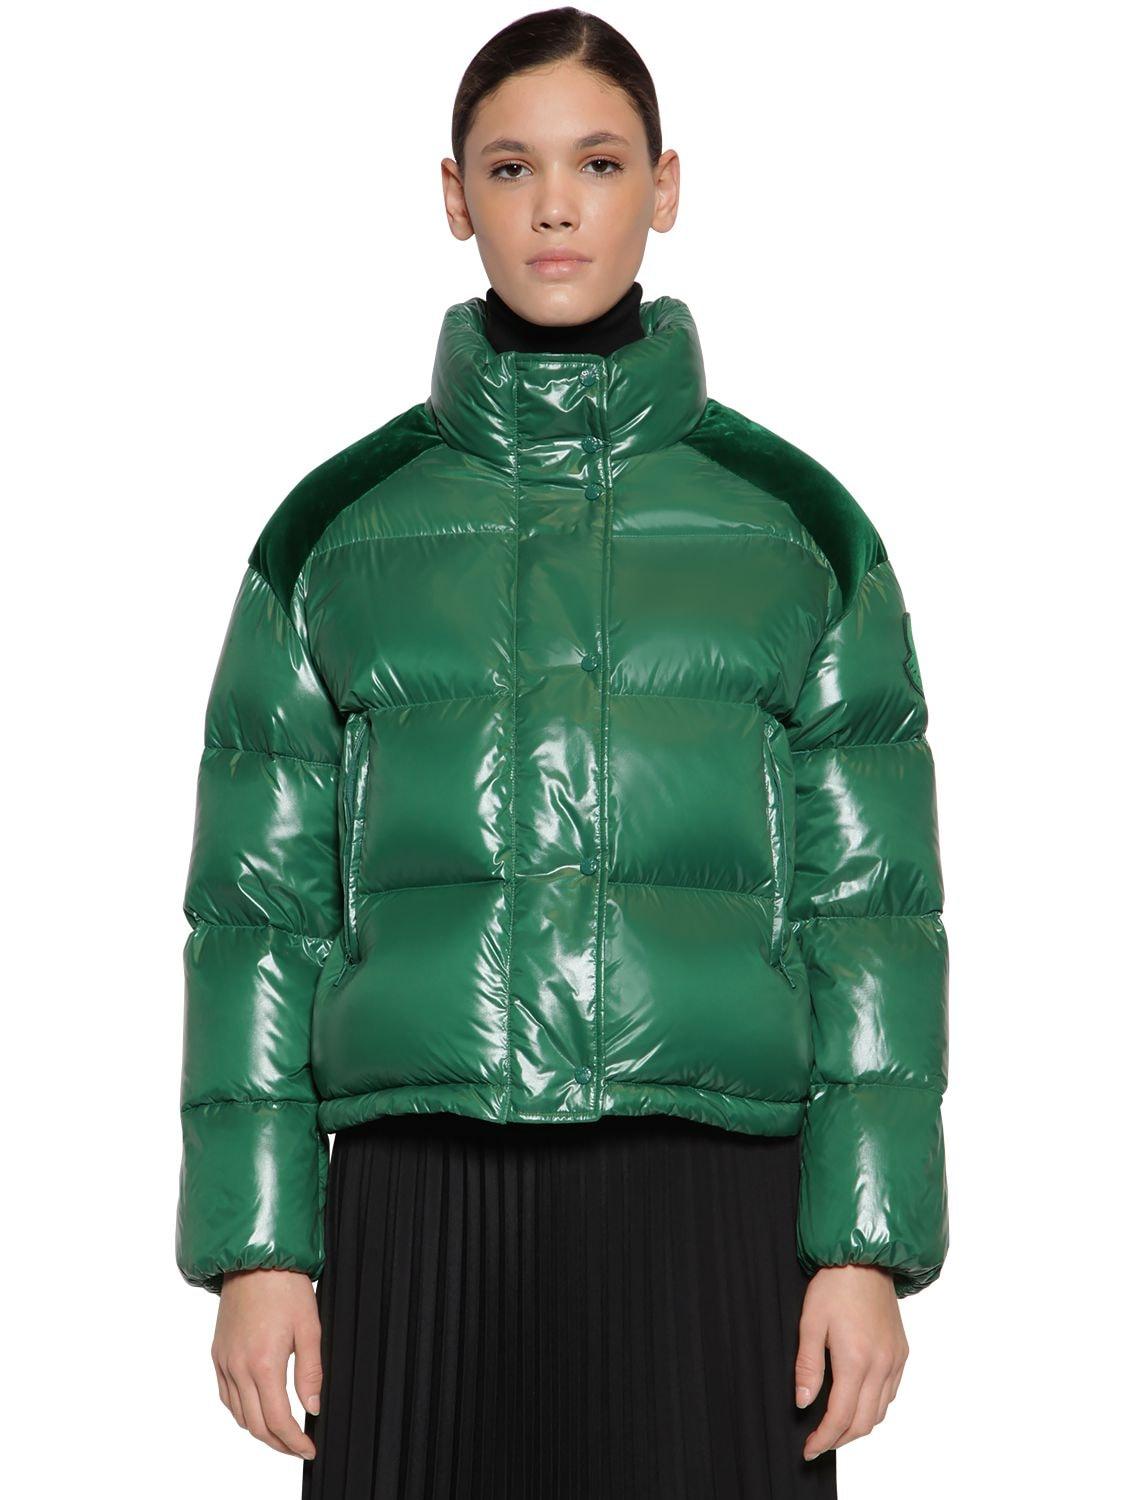 Moncler Synthetic Chouette Nylon Velvet Laqué Down Jacket in Green - Lyst